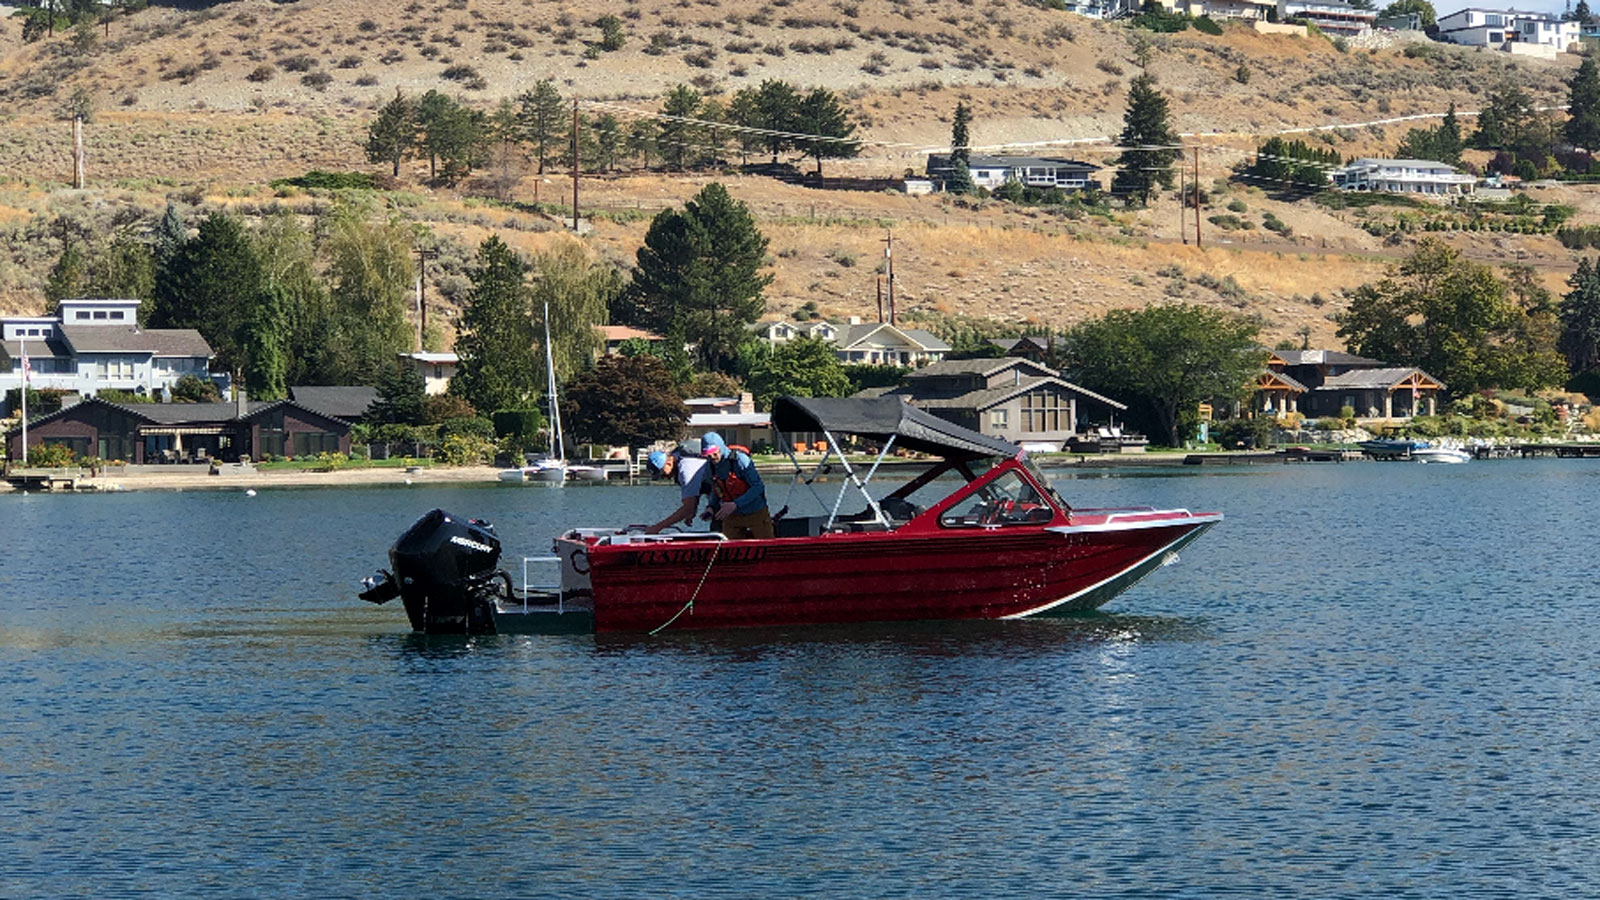 Survey shows growth of aquatic invasive species in Lake Chelan